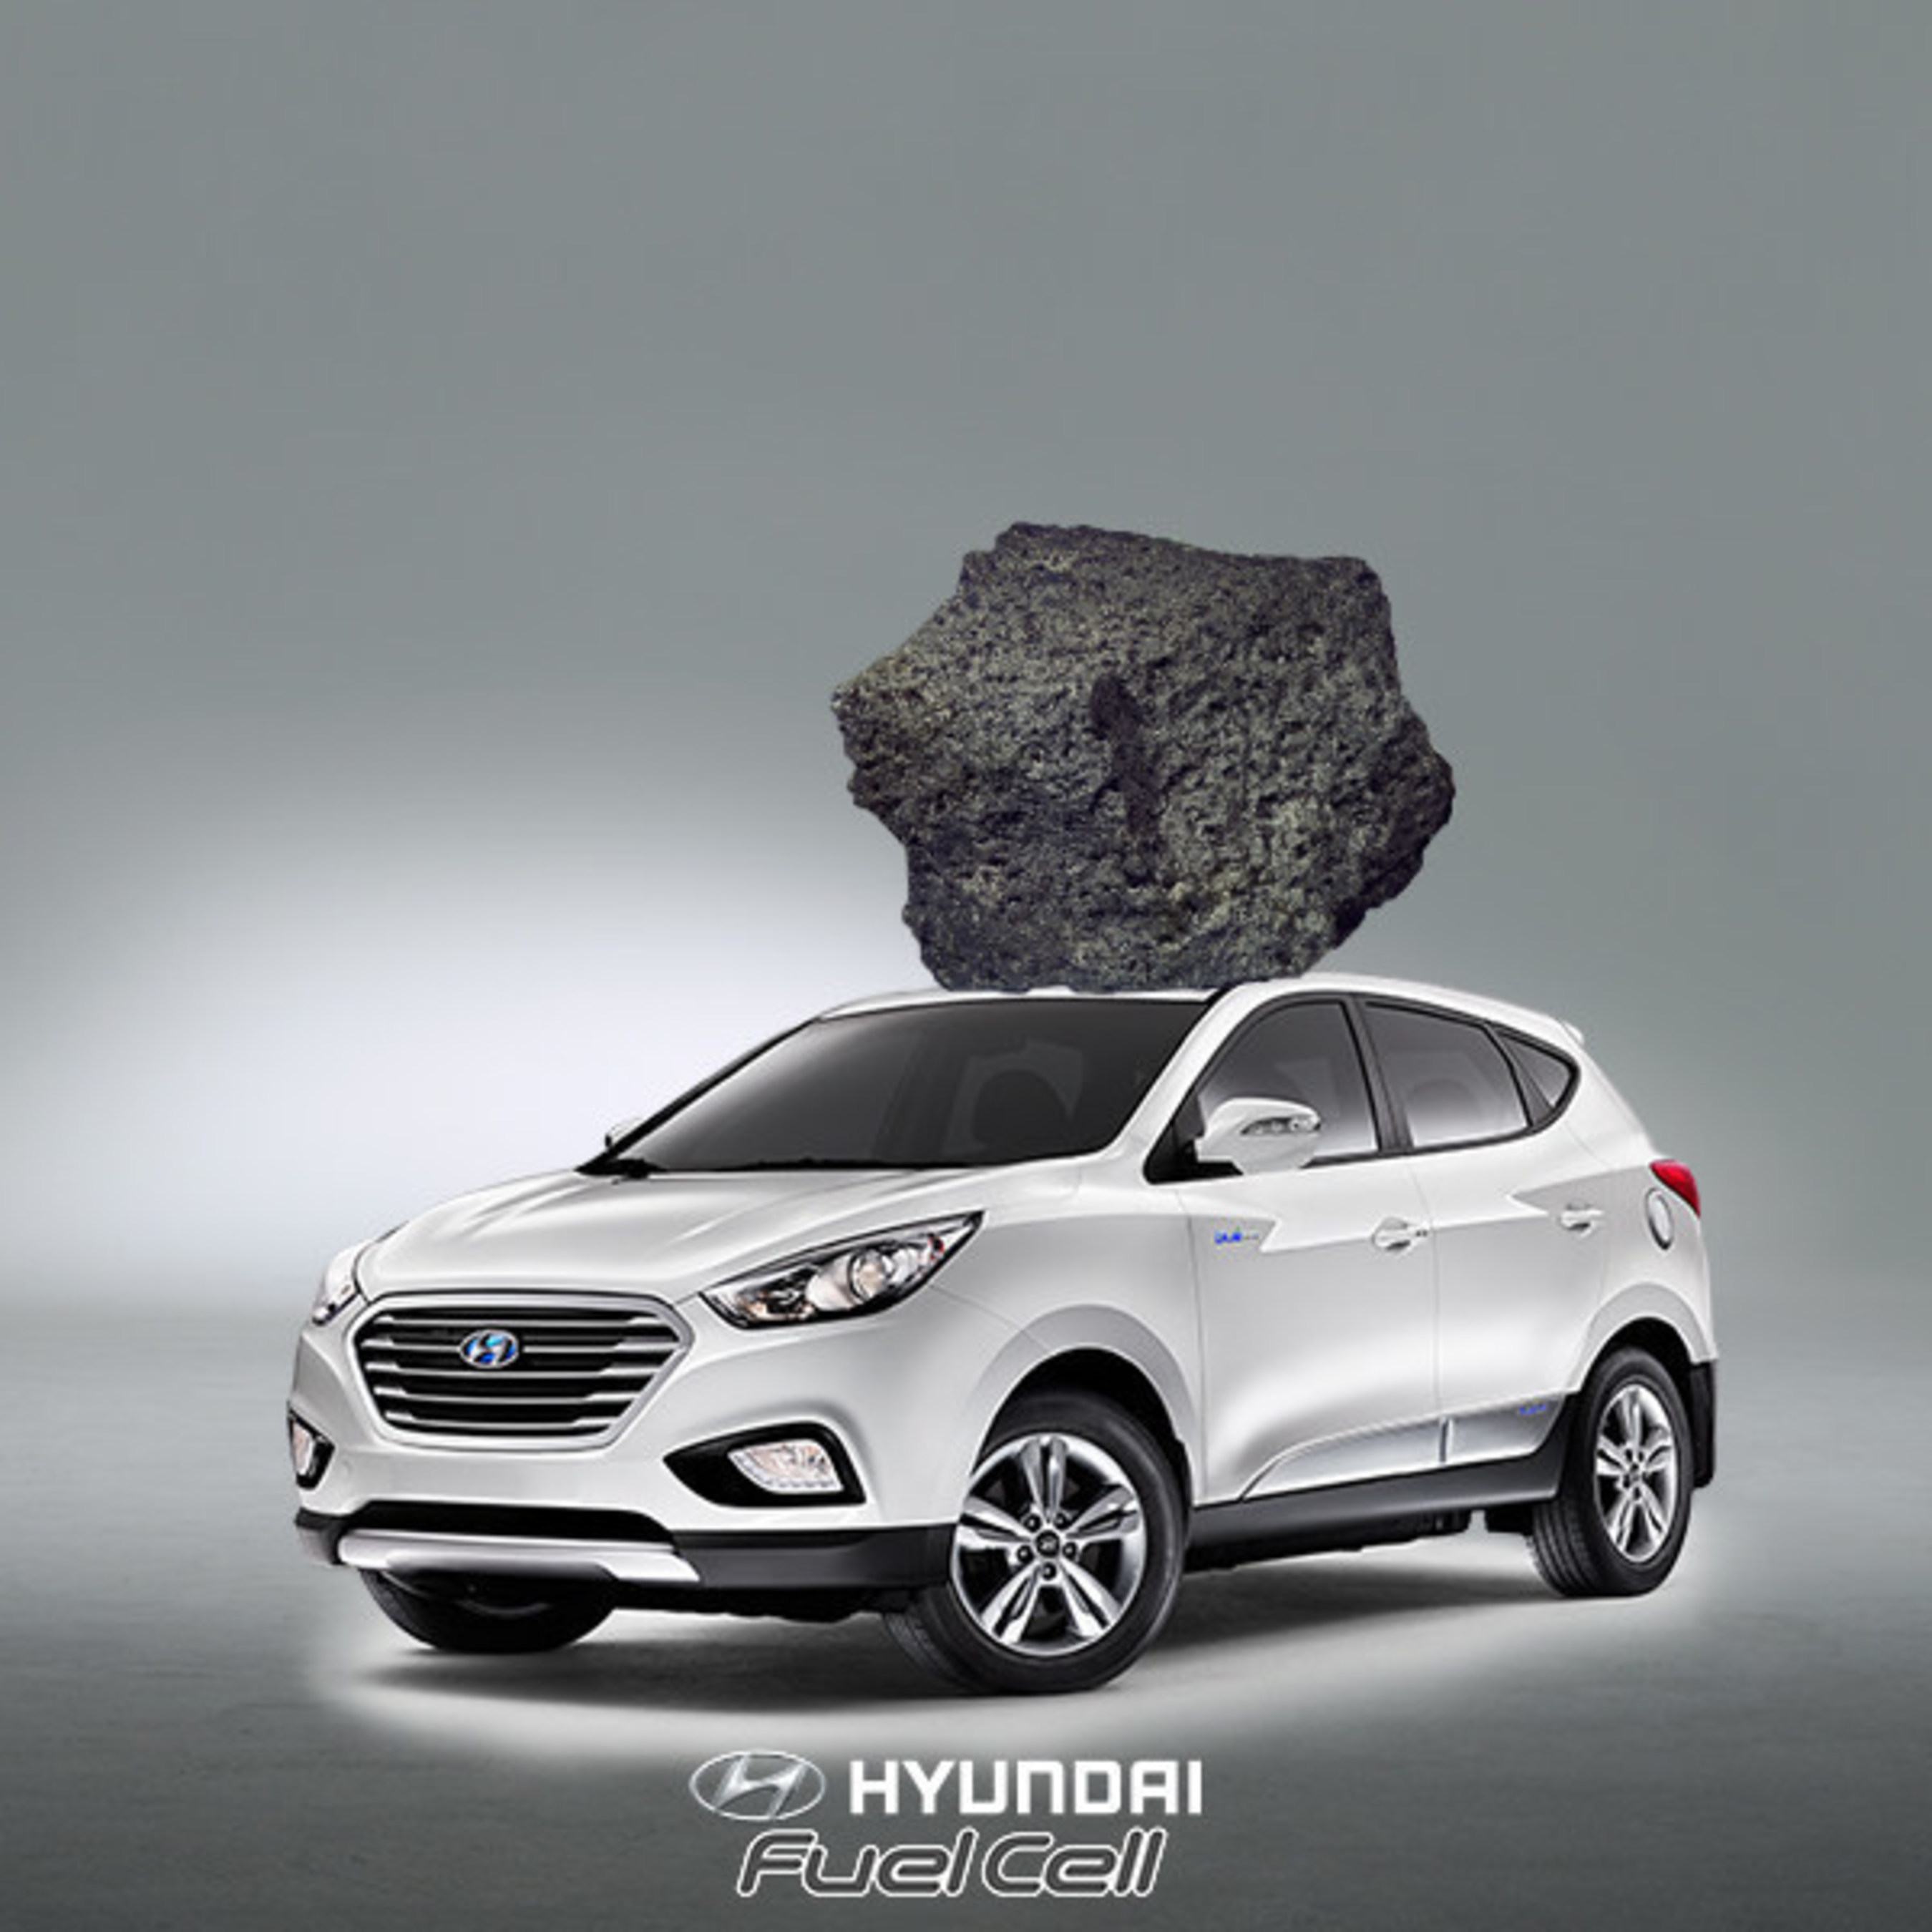 HYUNDAI TUCSON FUEL CELL DRIVERS ACCUMULATE EMISSIONS-FREE ROUND-TRIP MILEAGE TO THE MOON AND BACK